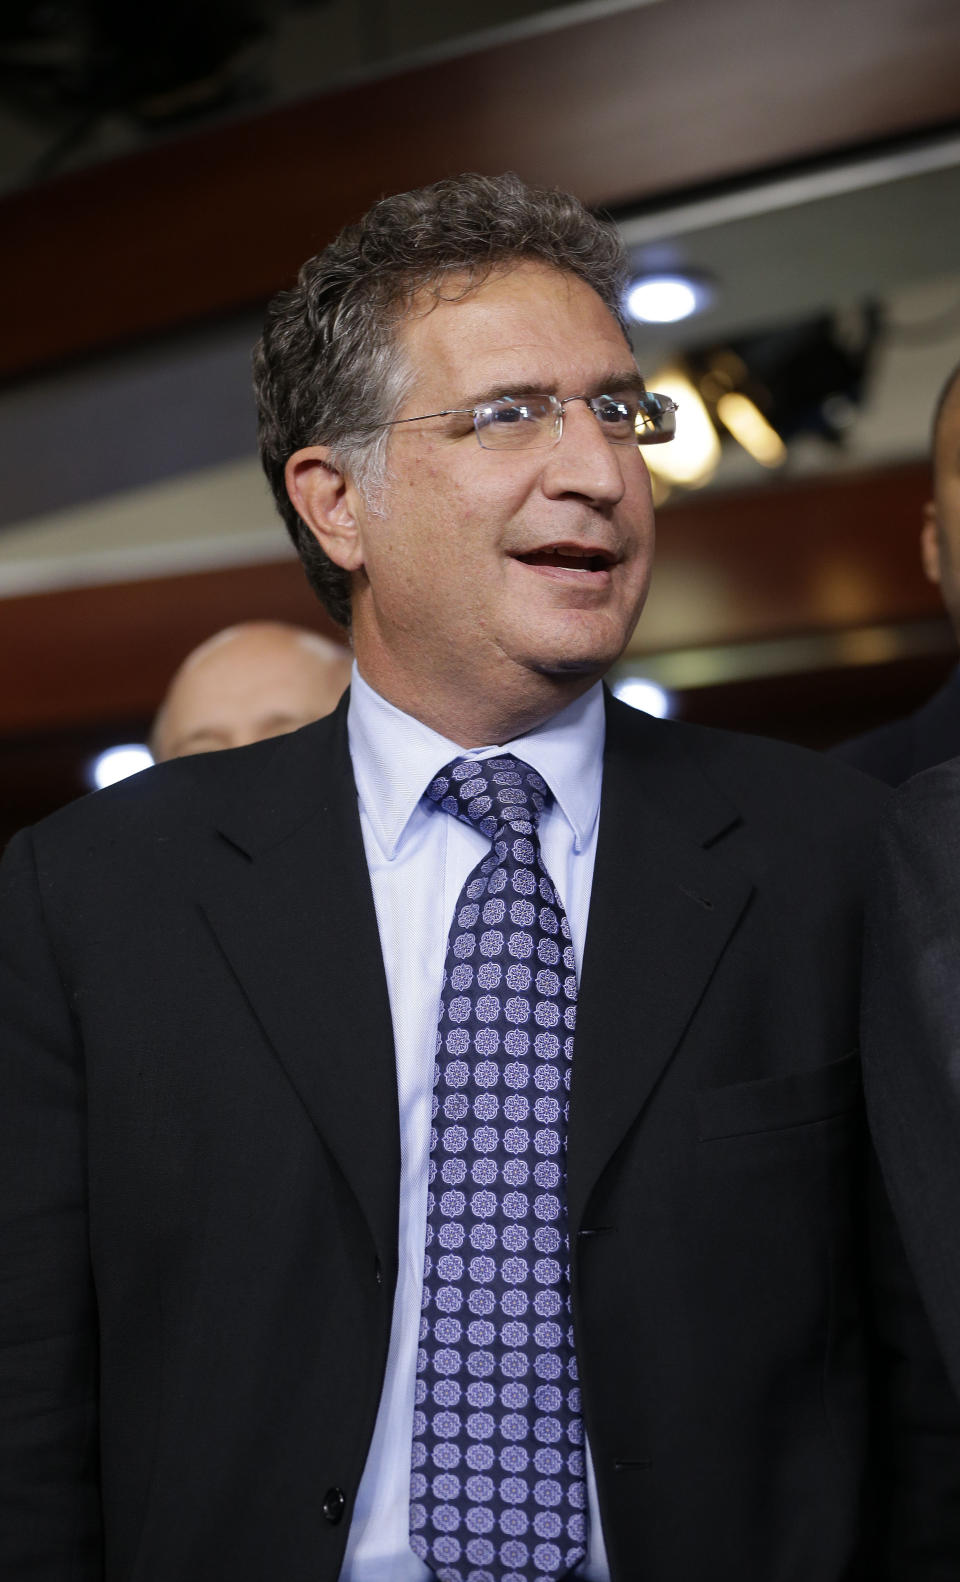 Rep.-elect Joe Garcia, D-Fla. is seen on stage during a news conference with newly elected Democratic House members, on Capitol Hill in Washington, Tuesday, Nov. 13, 2012. (AP Photo/Pablo Martinez Monsivais) 